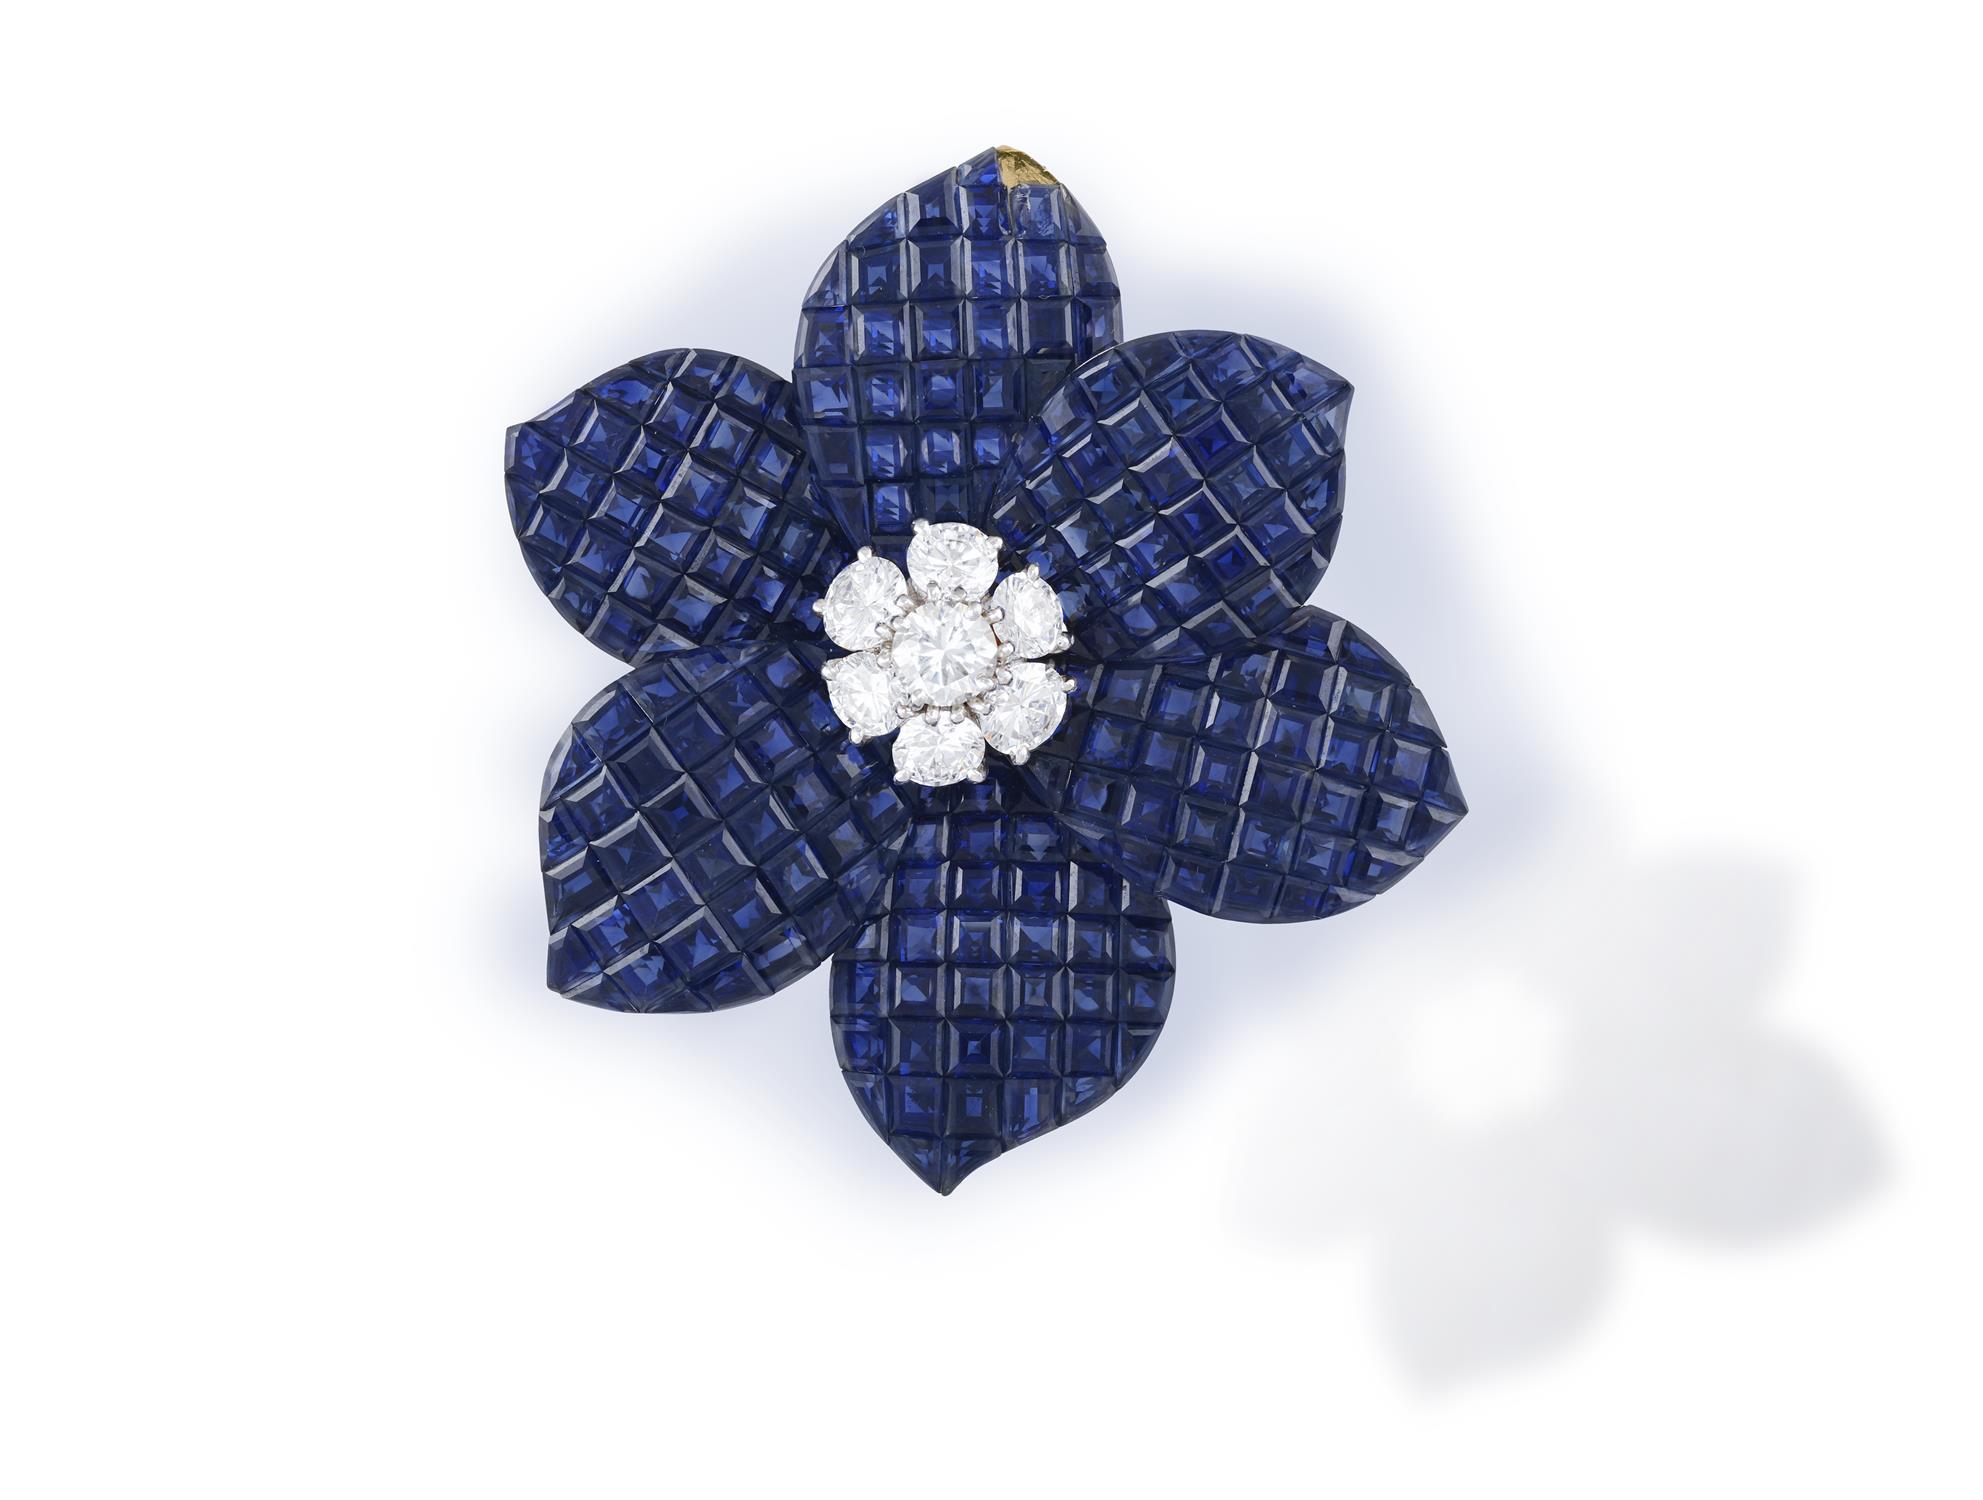 A RARE & COLLECTIBLE MYSTERY-SET SAPPHIRE AND DIAMOND FLOWER BROOCH, BY VAN CLEEF & ARPELS The